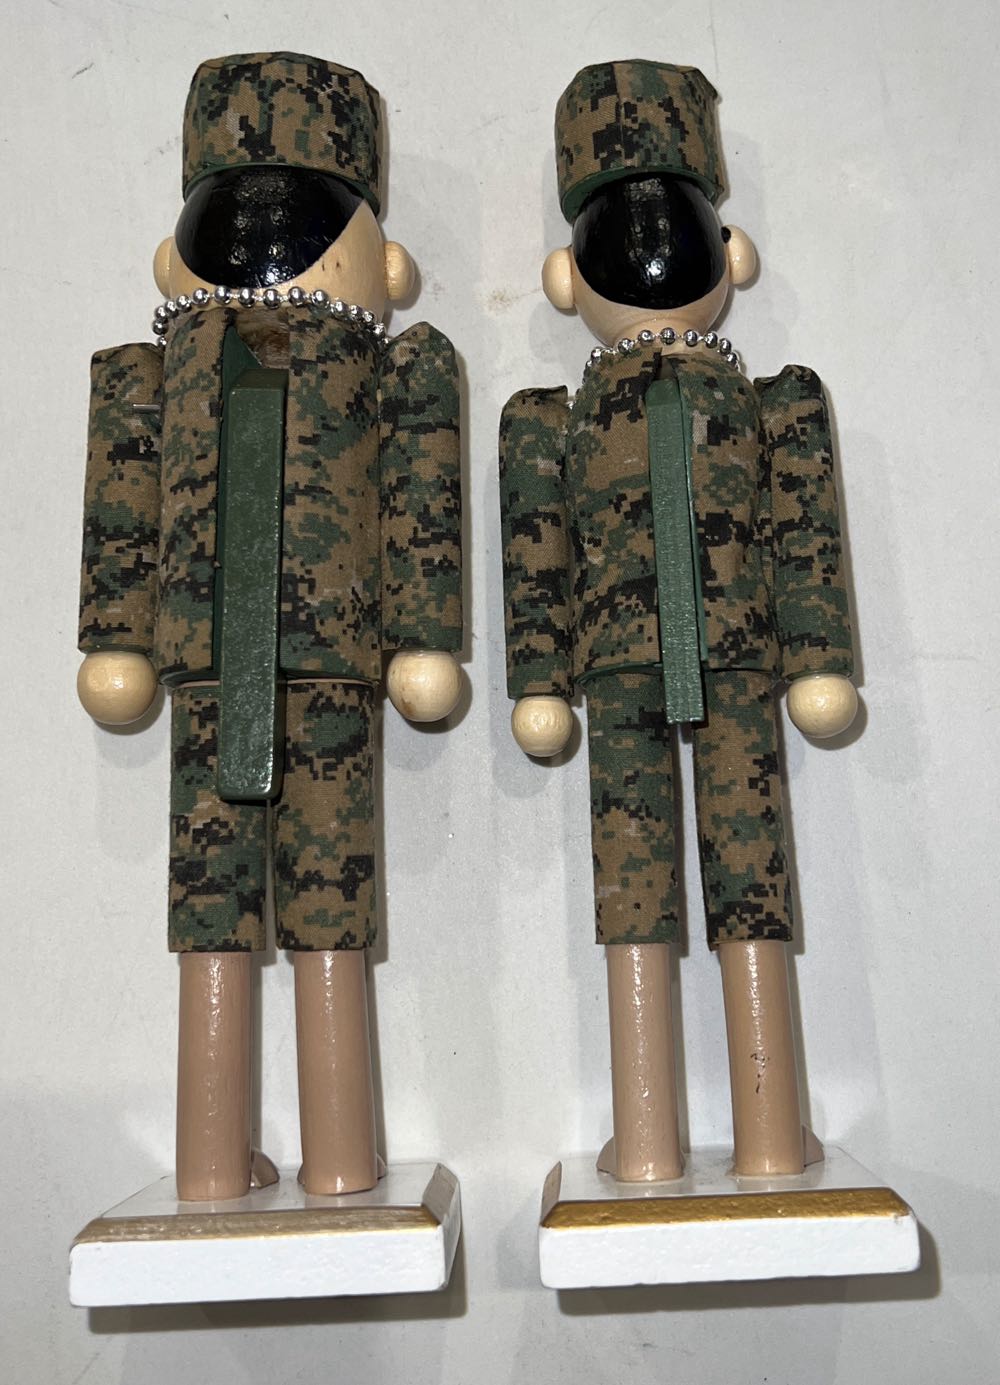 Military Nutcracker  - US Military (Military) ornament collectible - Main Image 2